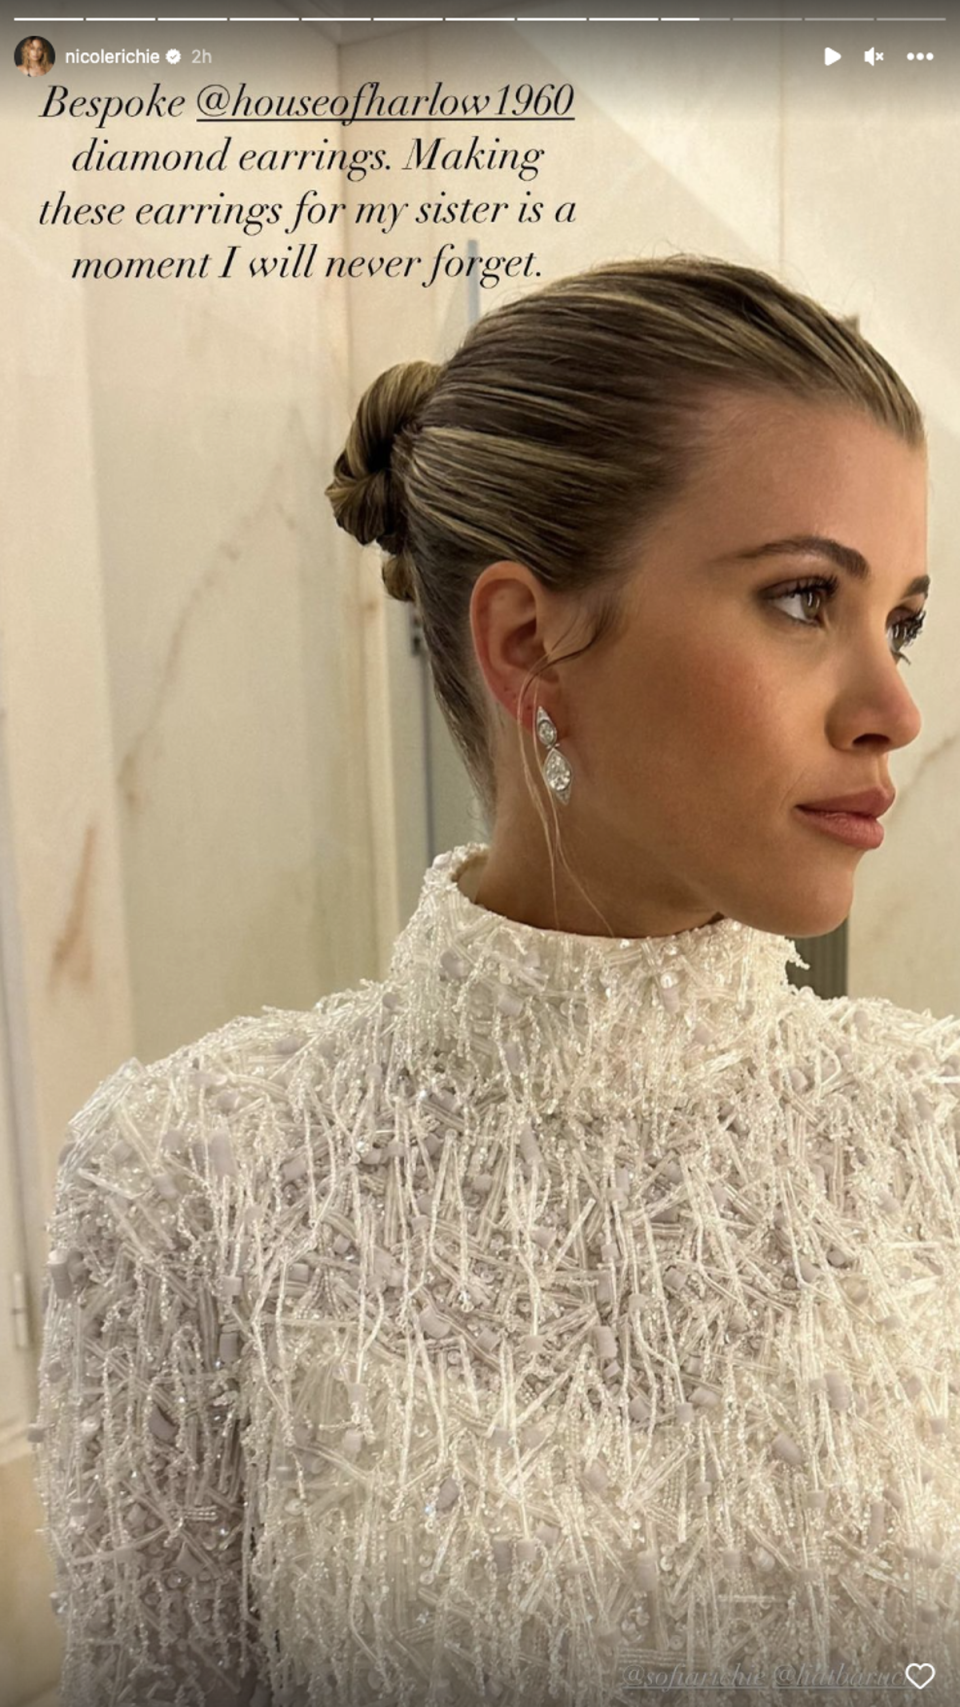 Sofia Richie wears earrings from sister Nicole’s brand for wedding (Instagram / Nicole Richie)